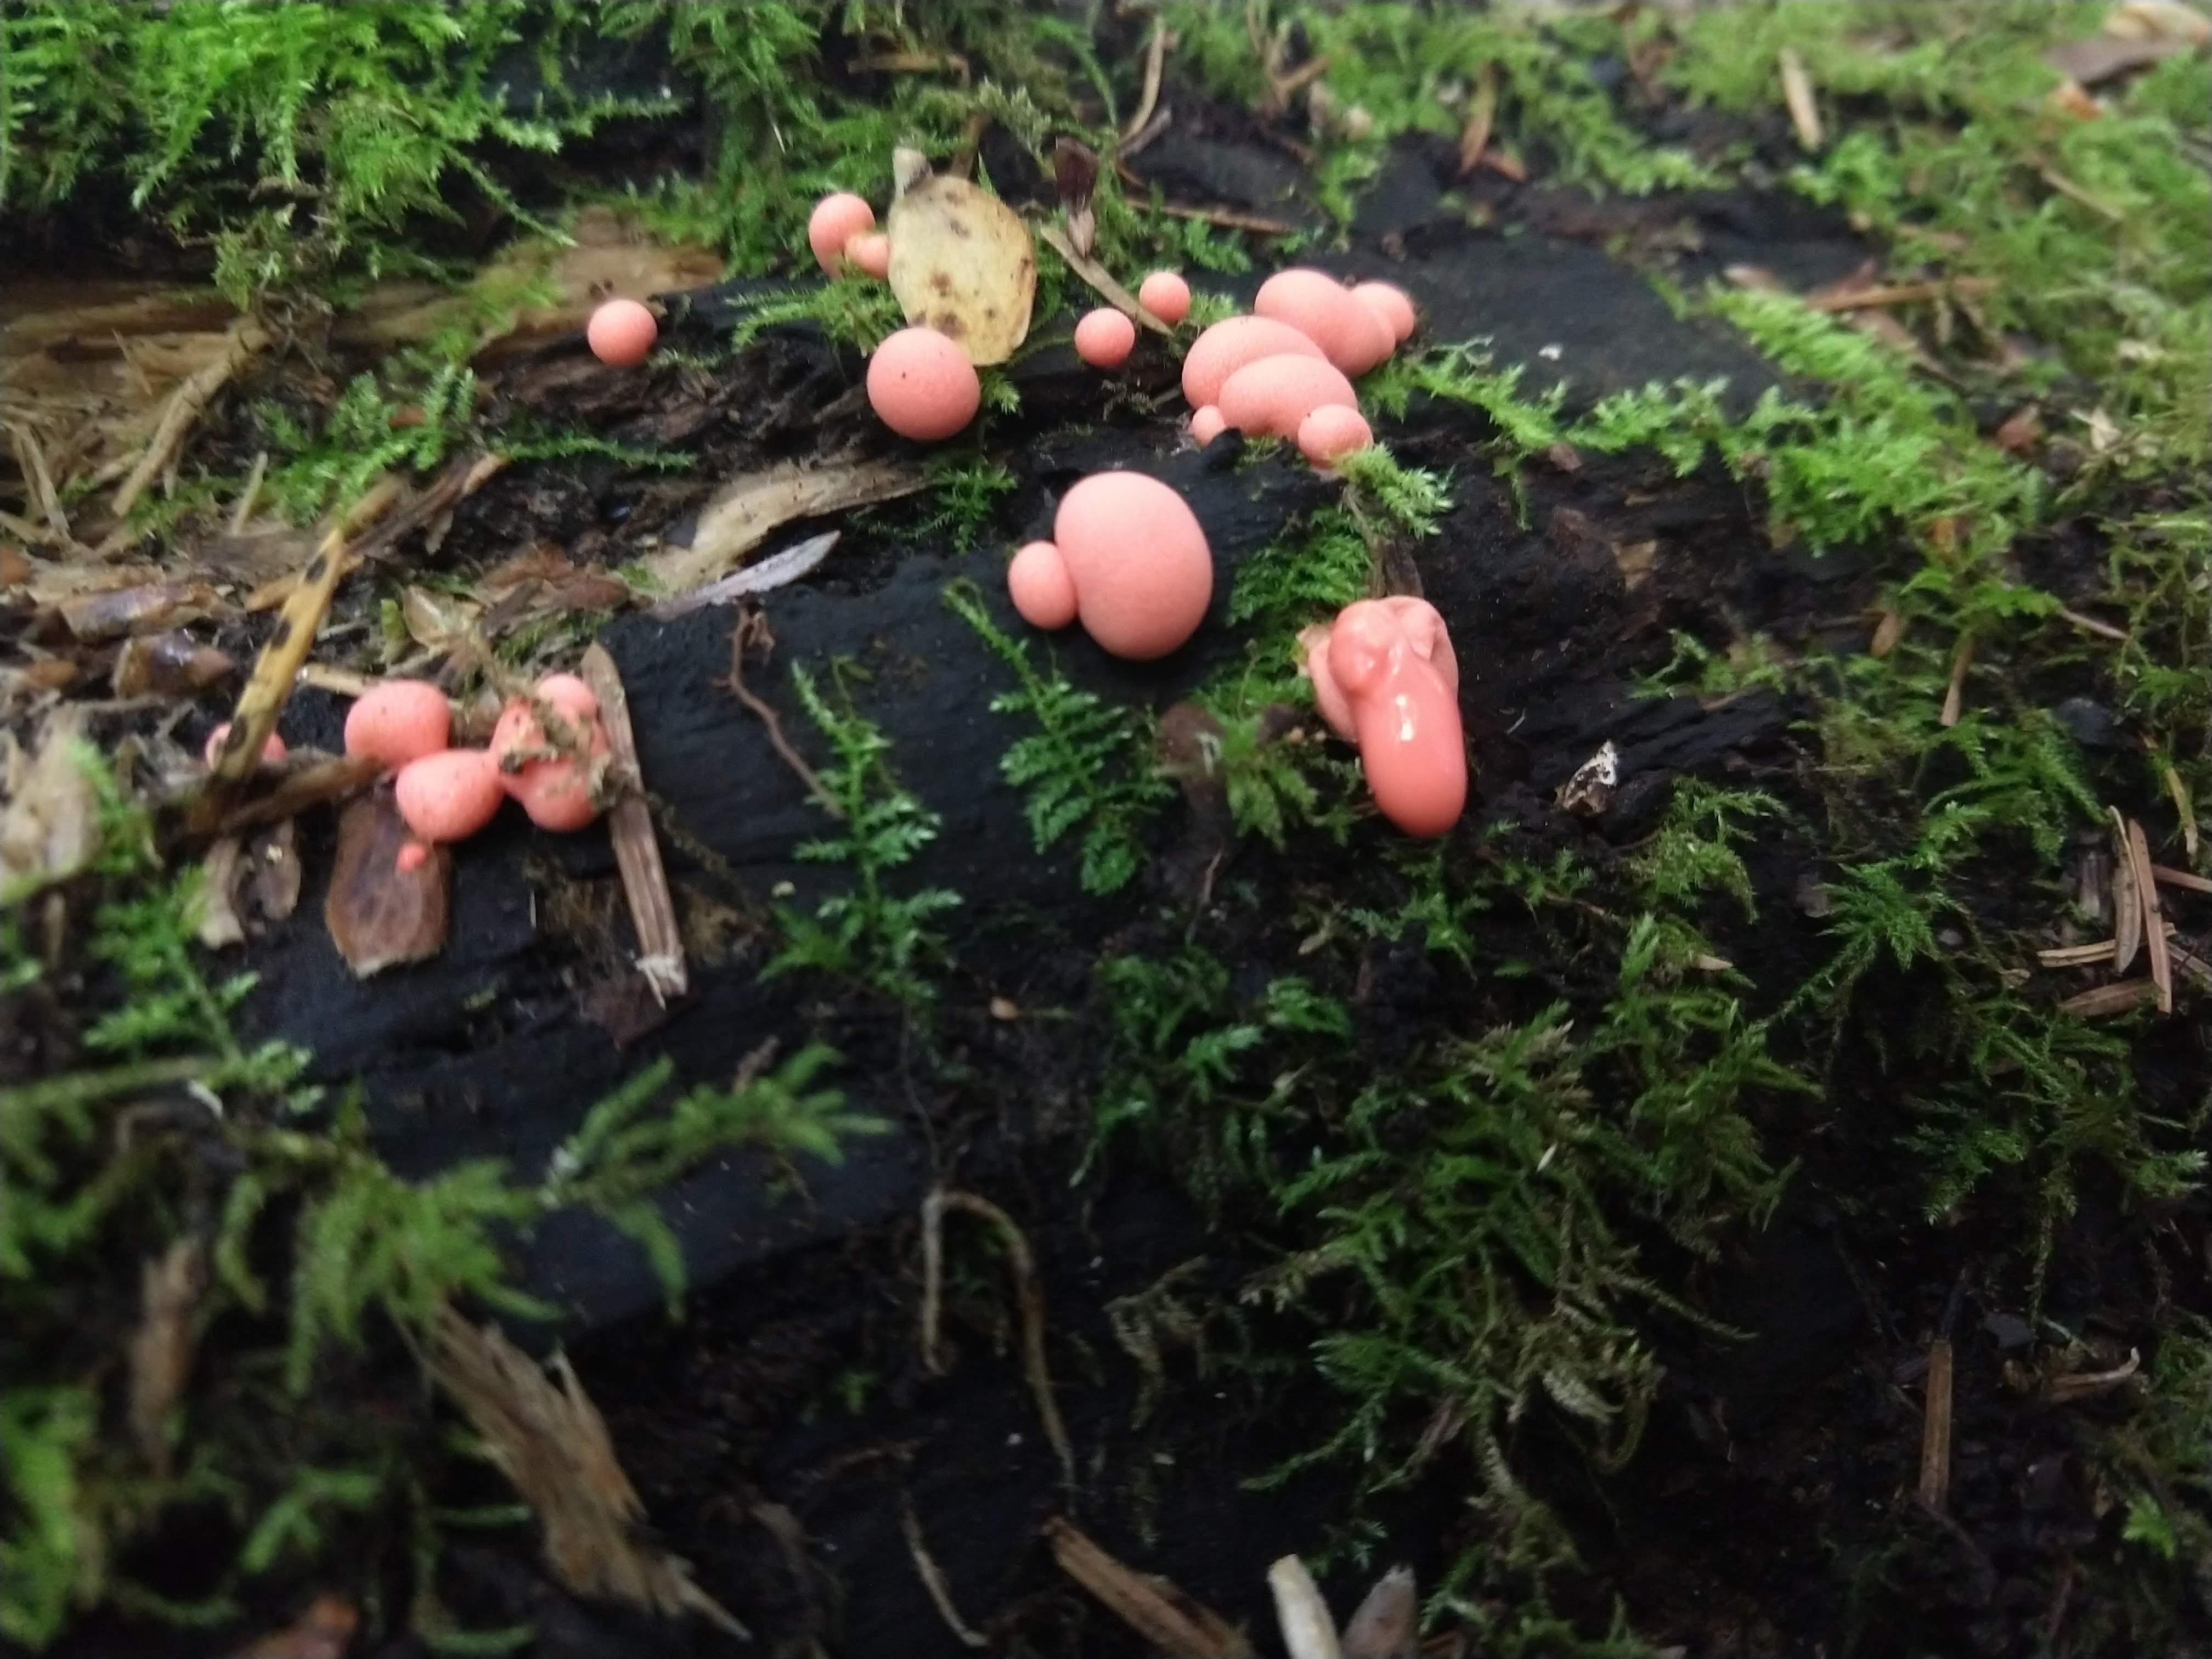 Round, pink Lycogala fruiting bodies oozing after being poked